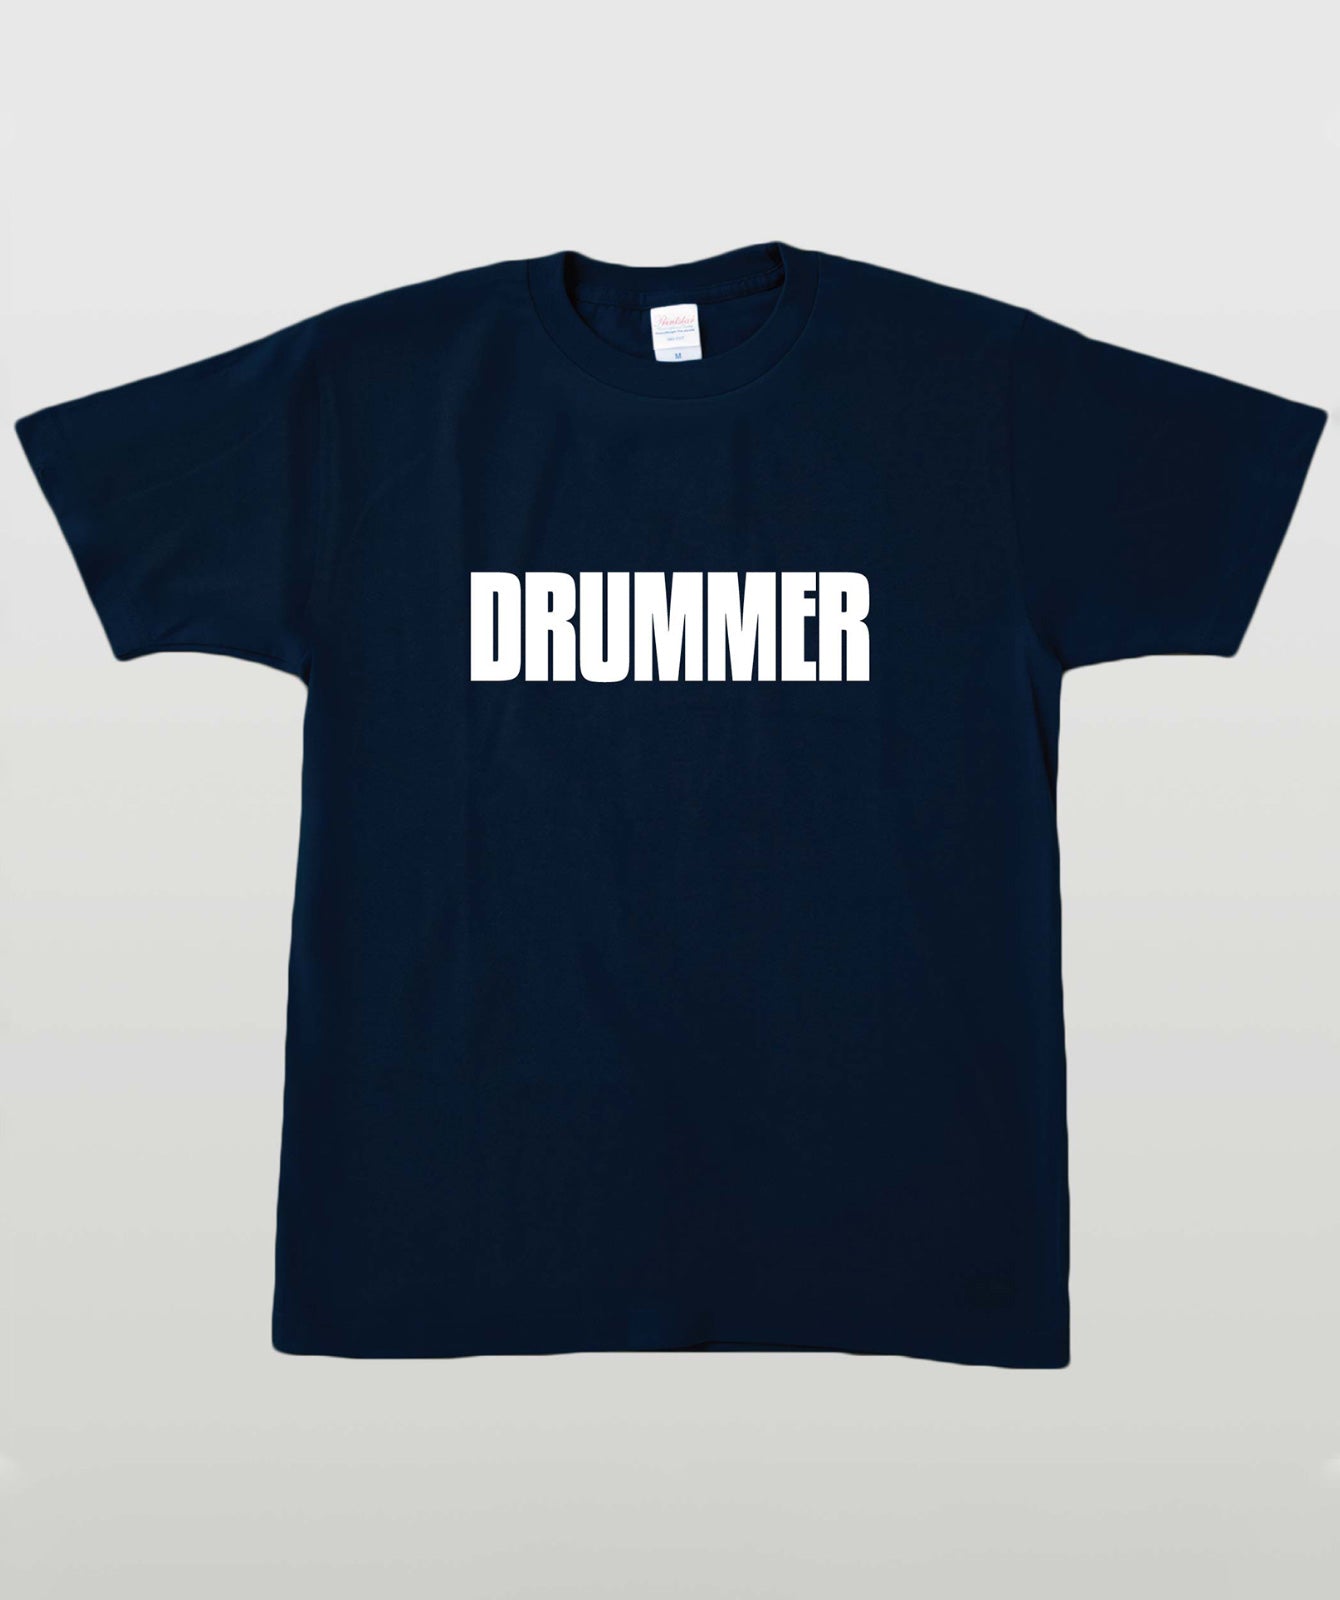 MS PLAYER SERIES ～DRUMMER Type E～